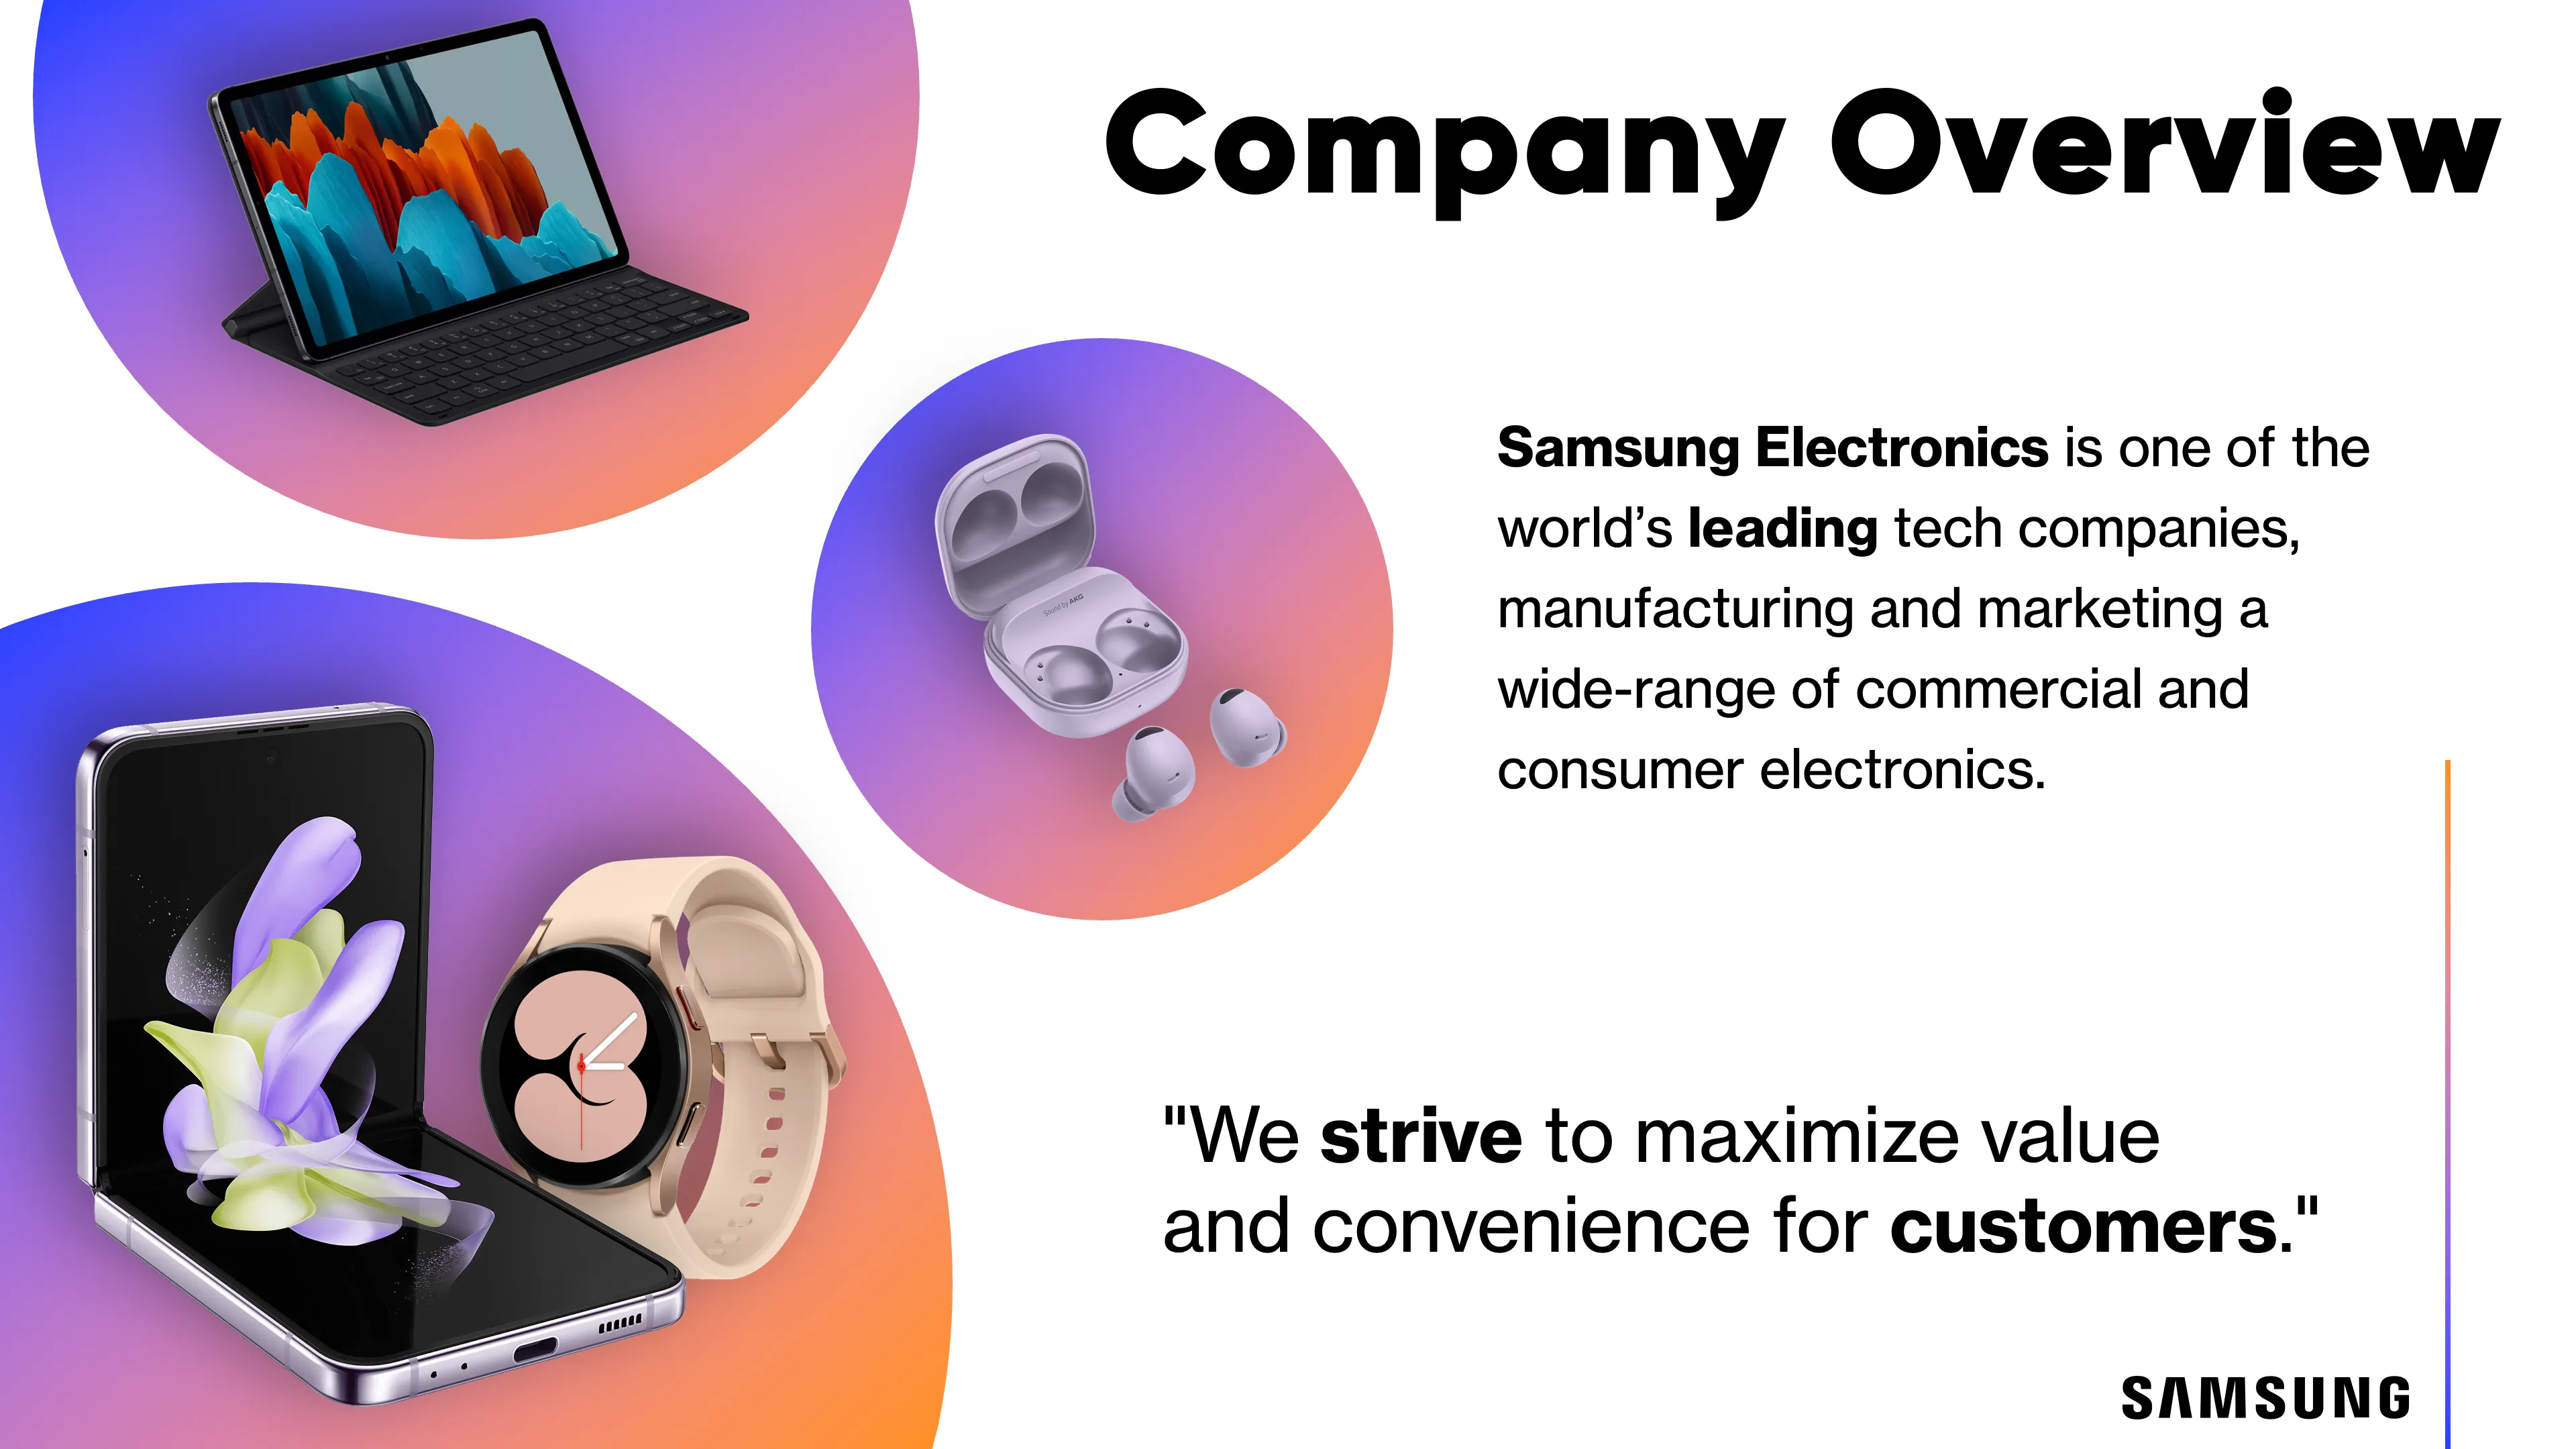 Slide 4, detailing a company overview for Samsung Electronics.